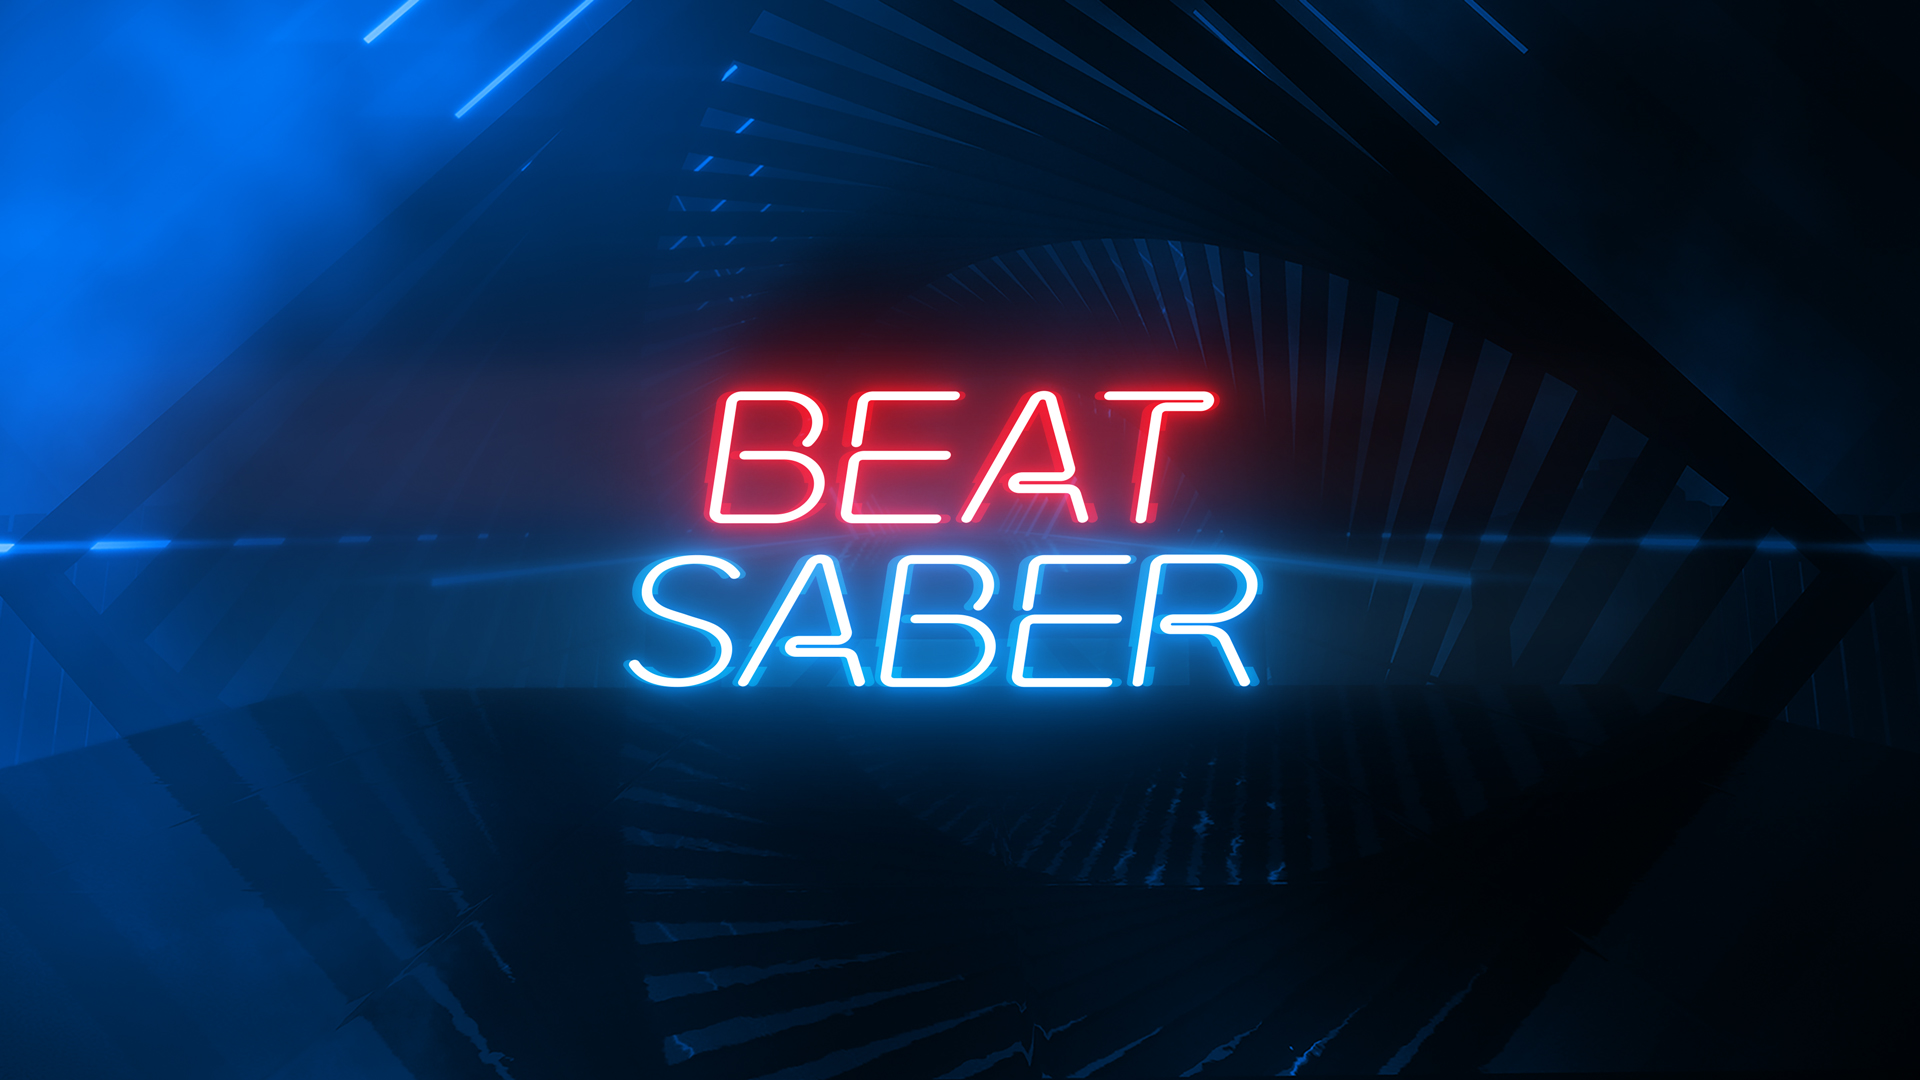 Beat Saber on Twitter: "We're dropping a Beat Saber wallpaper below, and we might drop soon. #WallpaperWednesday 📱 https://t.co/RaSCL5iZqn 🖥️ Full https://t.co/tW5aBEdgRe 🖥️ 2K: 🖥️ 4K: https://t.co/IQz5Pwvvhs ...